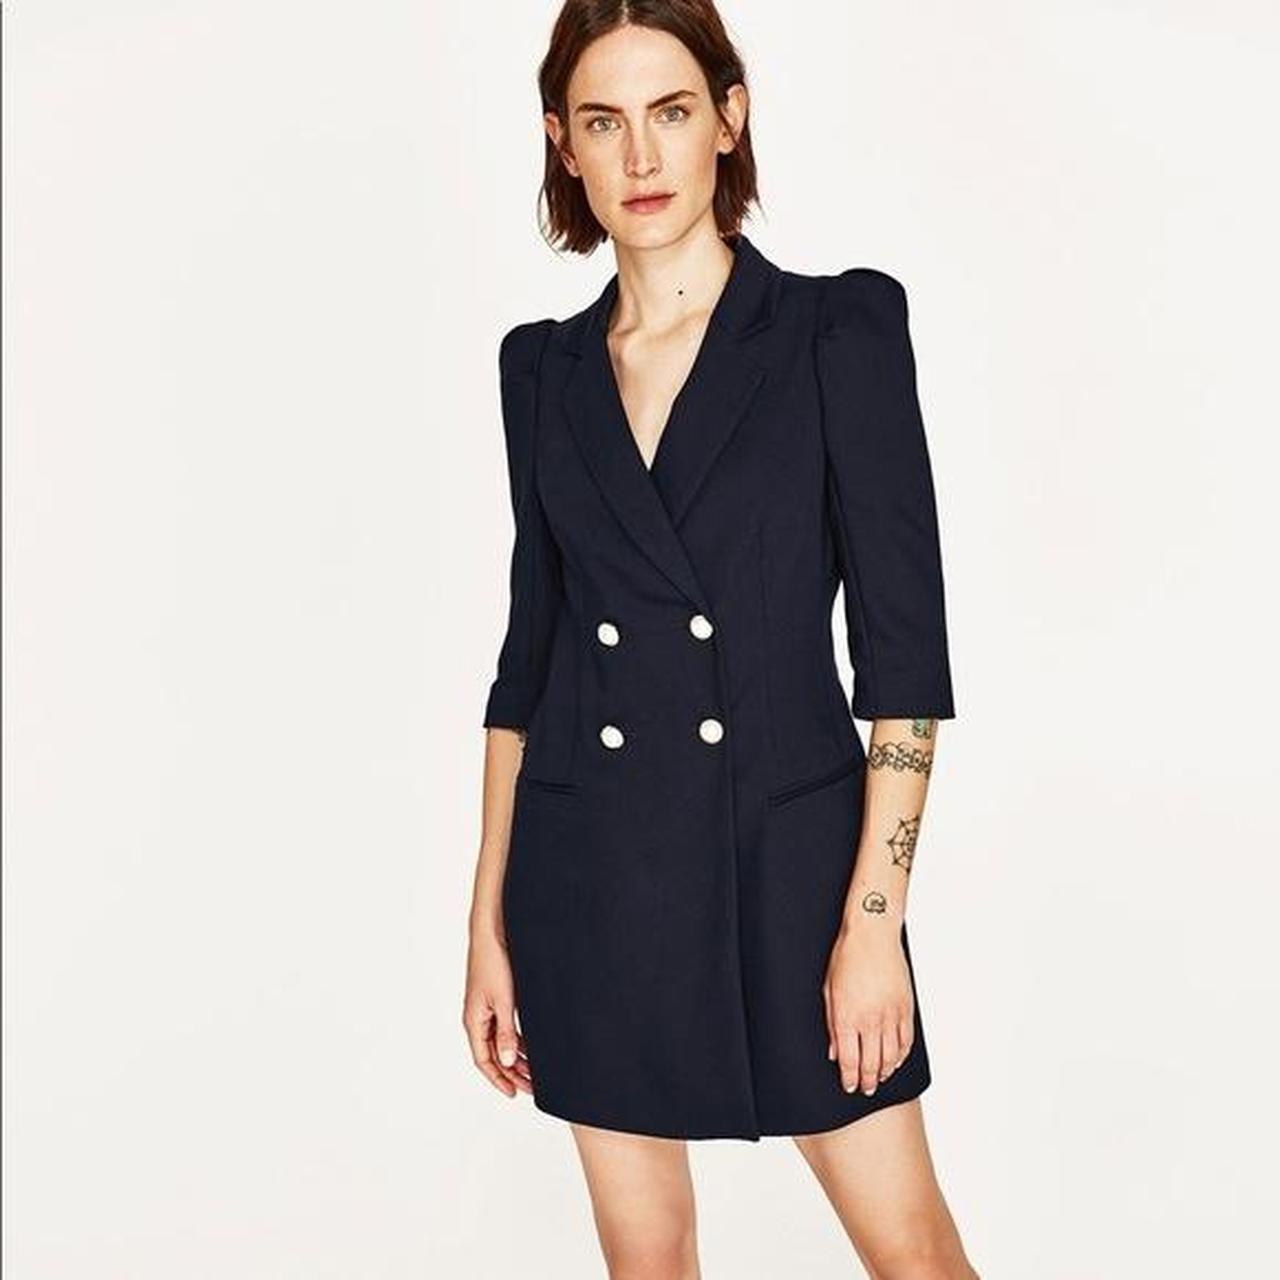 Luftpost Depression Påstand Navy blue double breasted blazer dress with pearl... - Depop